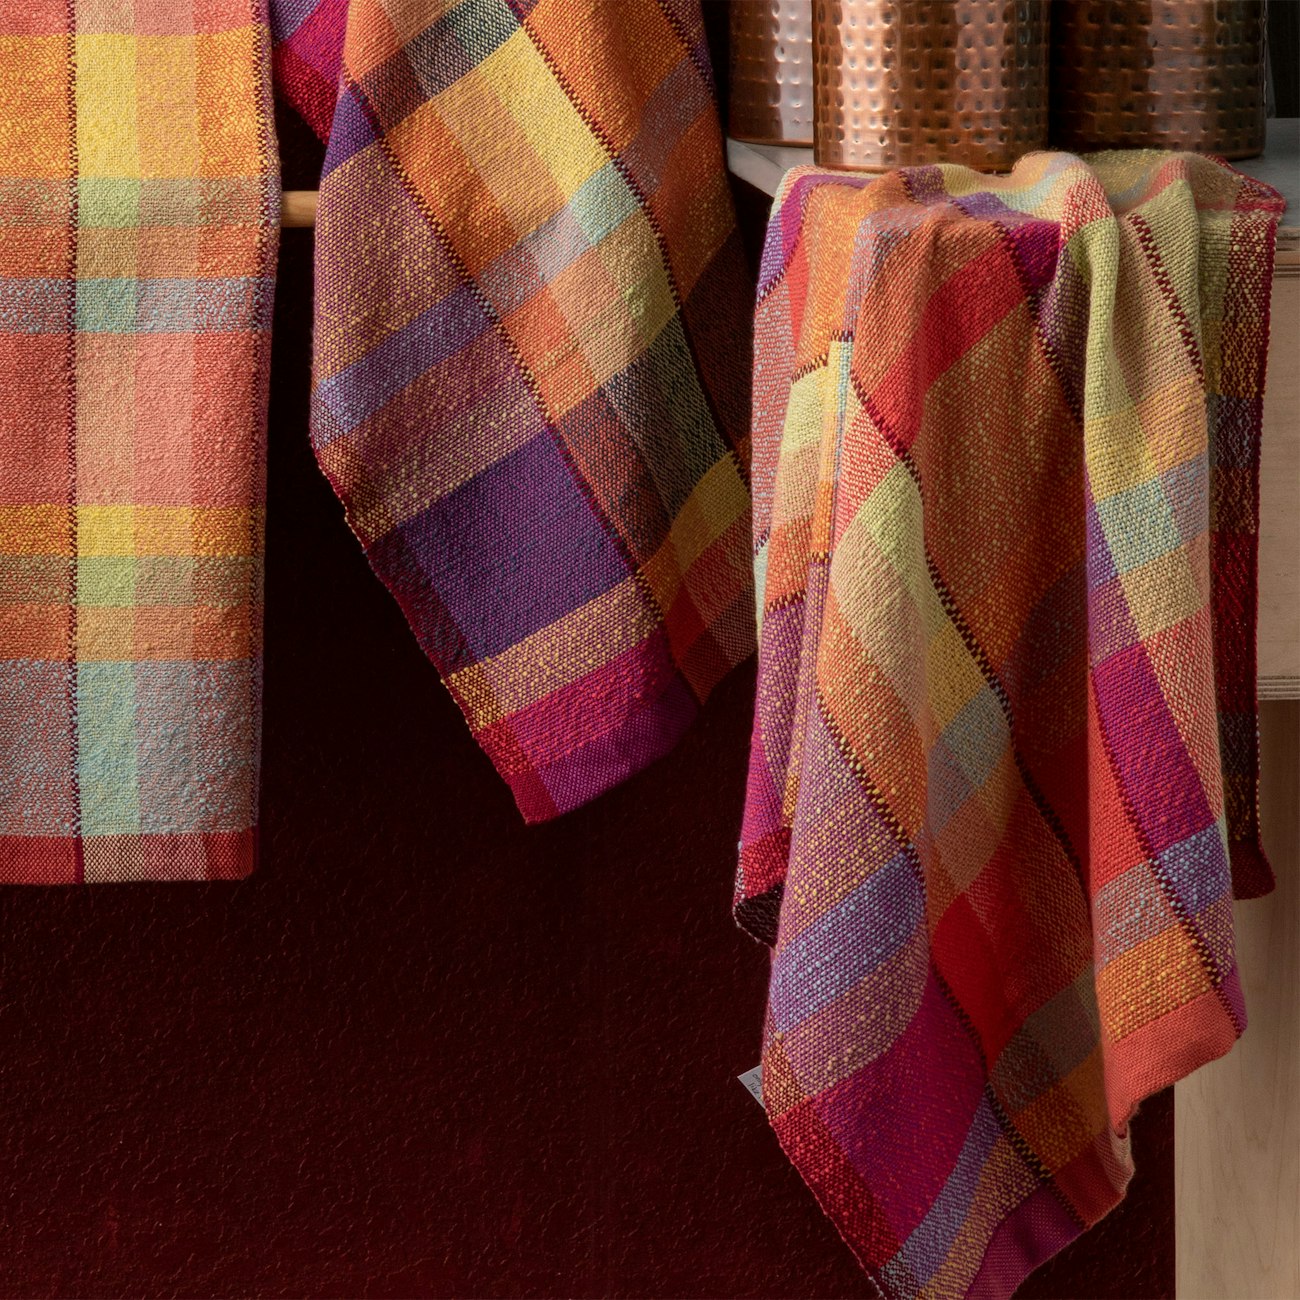 We couldn’t showcase a color gallery without towels or something multi-colored. These Oak Forest Towels by Keith Lilly gave us both! From Handwoven Jan/Feb 2022. Photo by Matt Graves